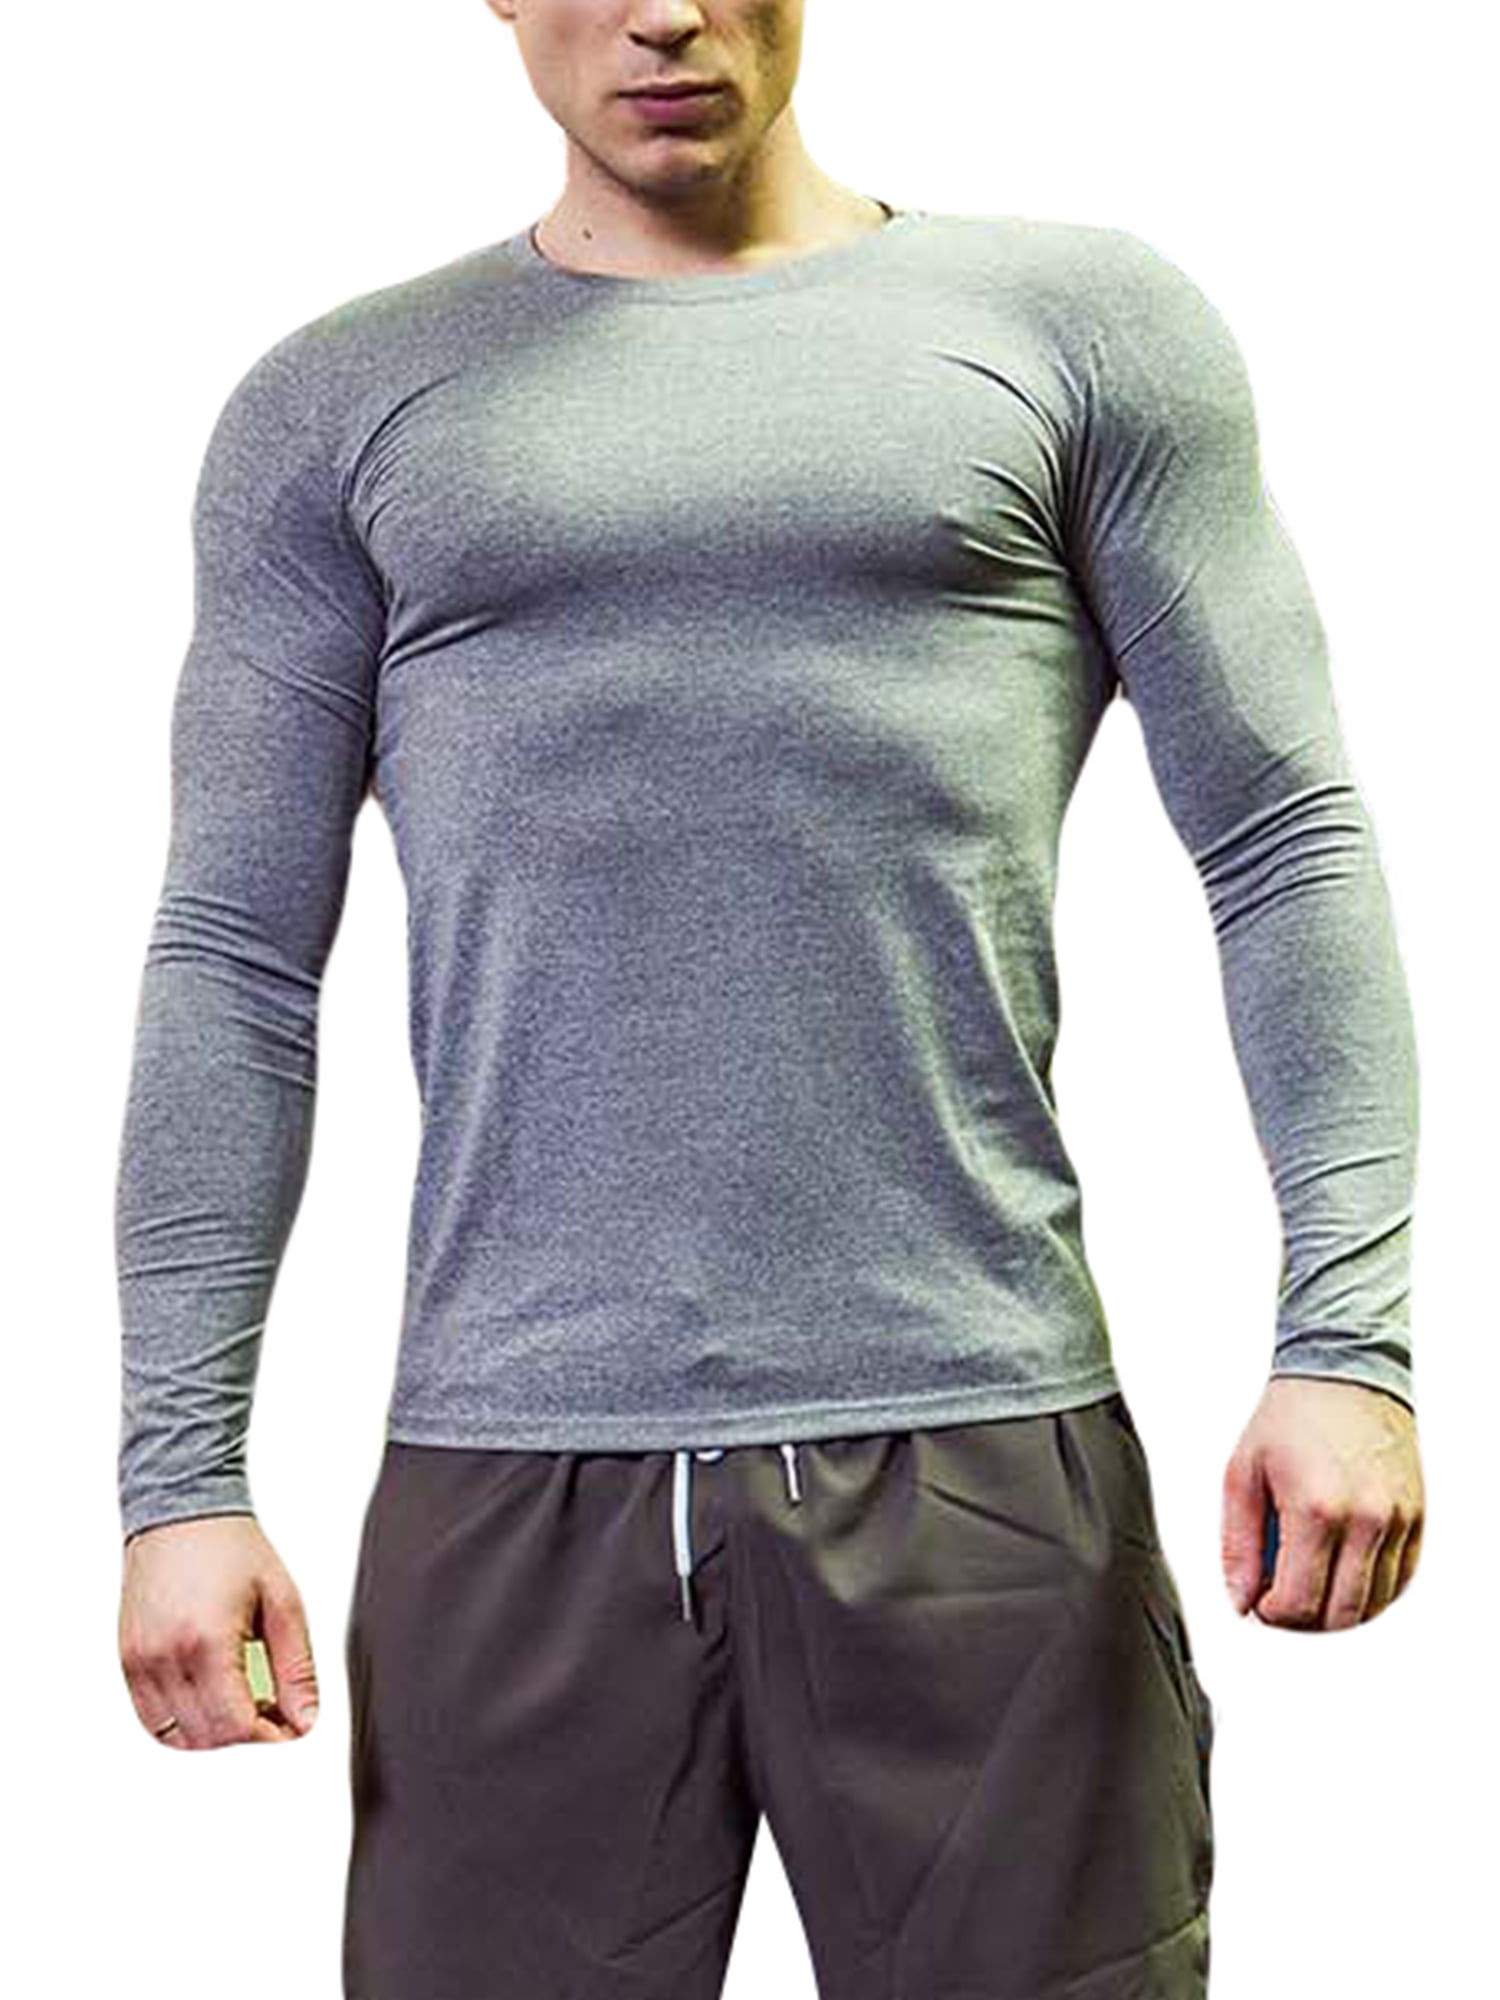 Details about   Men Compression Workout T-shirt Sweat Wicking Short Sleeve Athletic Training Top 